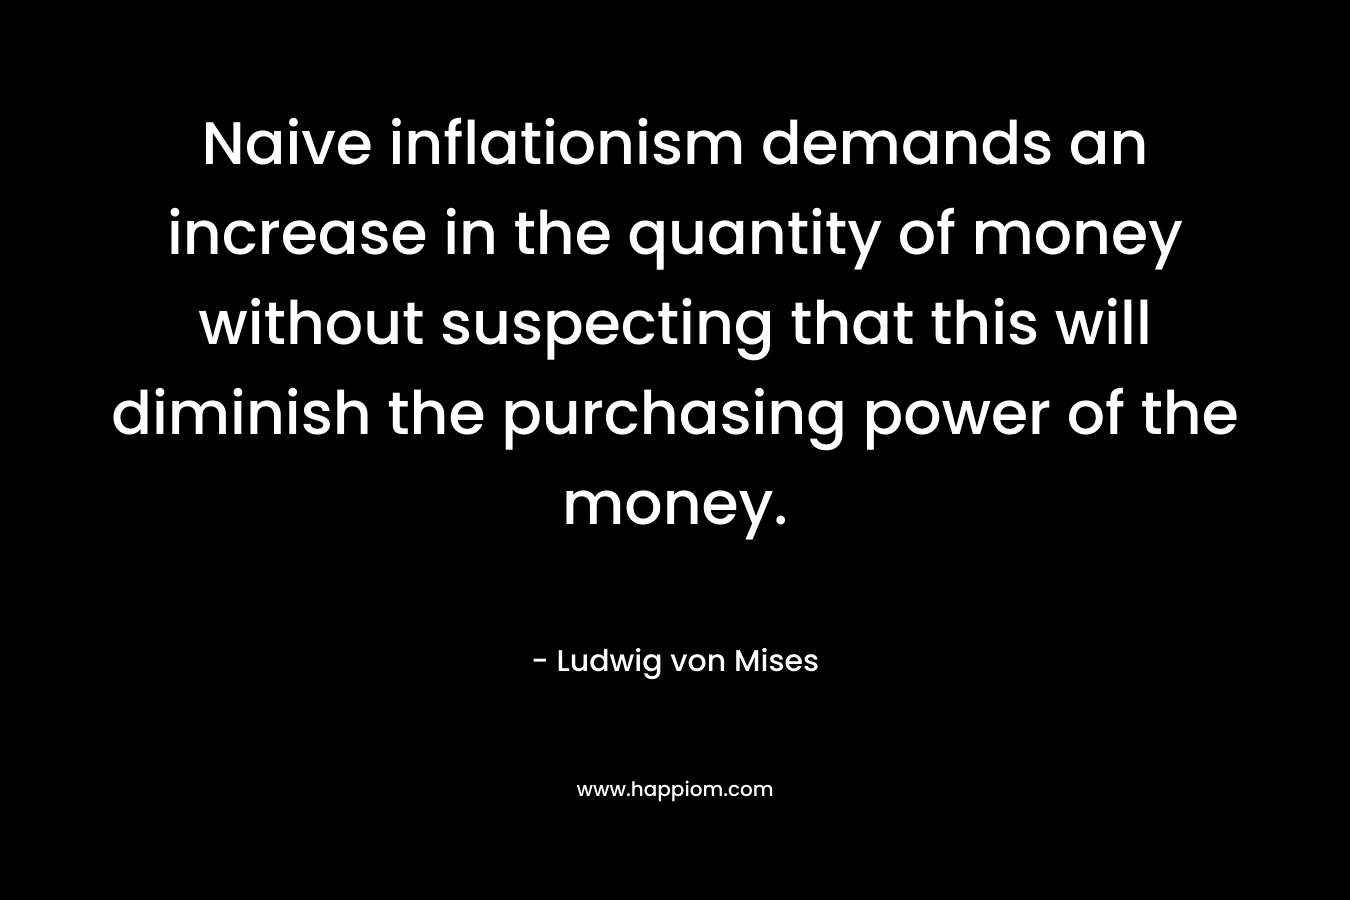 Naive inflationism demands an increase in the quantity of money without suspecting that this will diminish the purchasing power of the money.